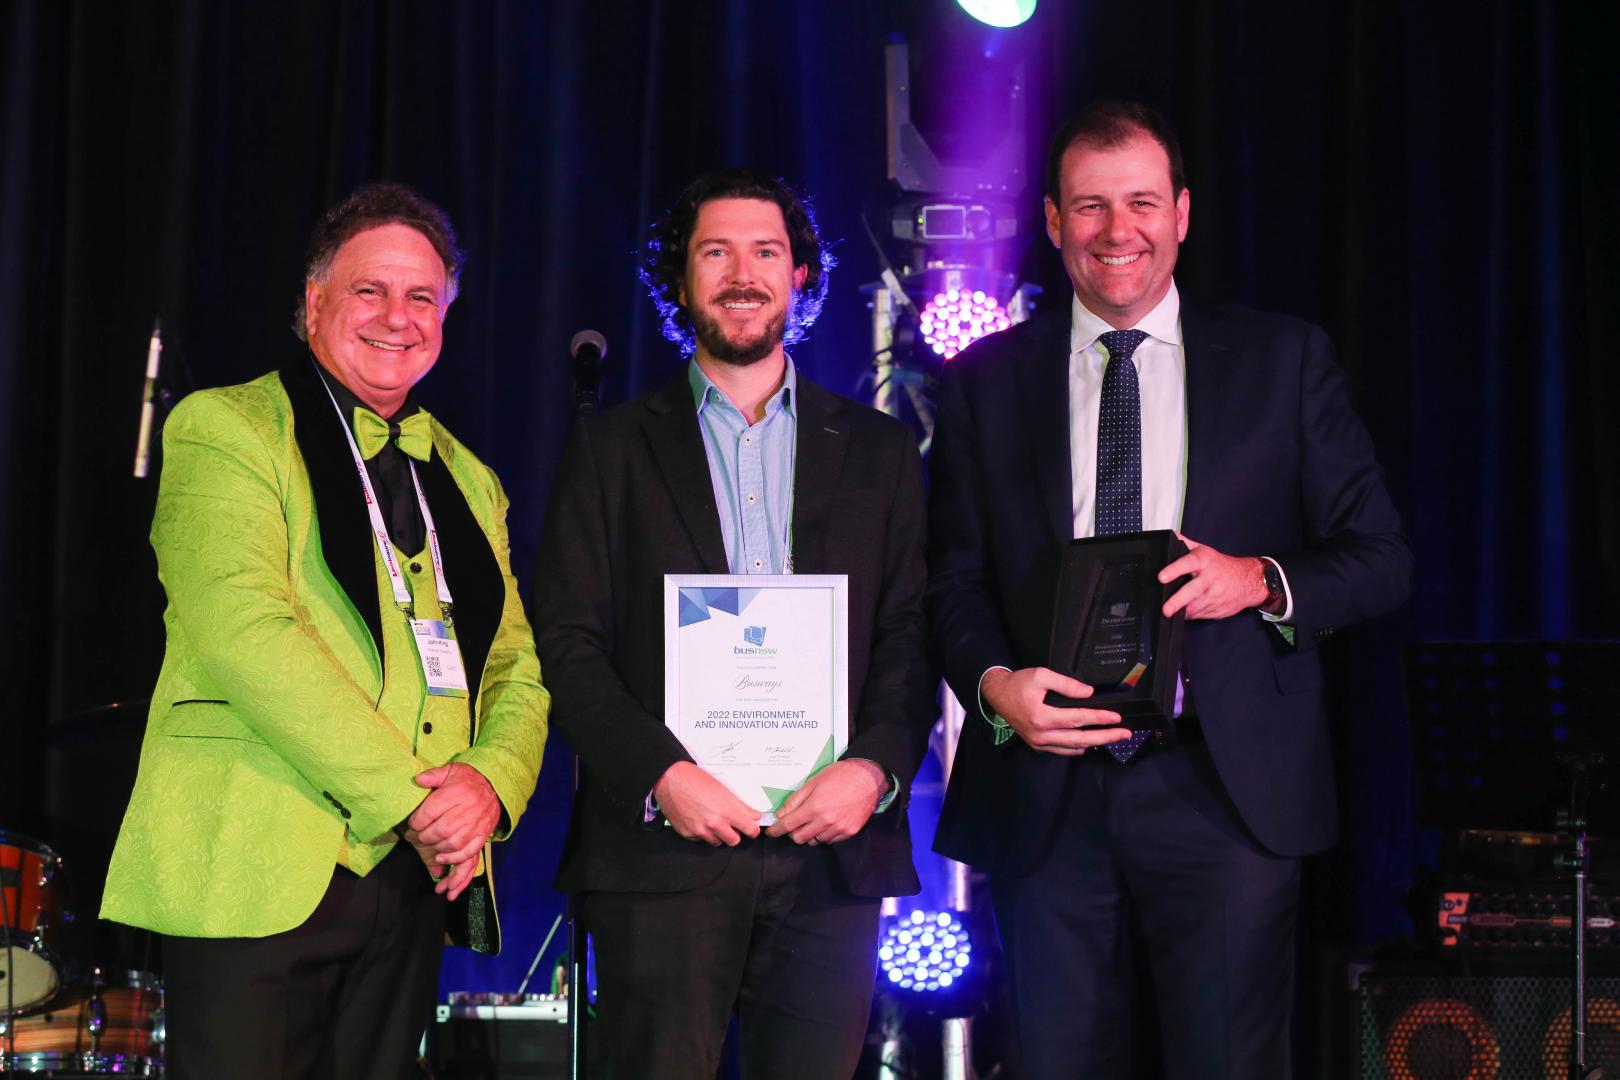 Busways Managing Director accepts the BusNSW Environment and Innovation Award from The Hon. Sam Farraway, Minister for Regional Transport and Roads NSW and Mr John King, president, BusNSW